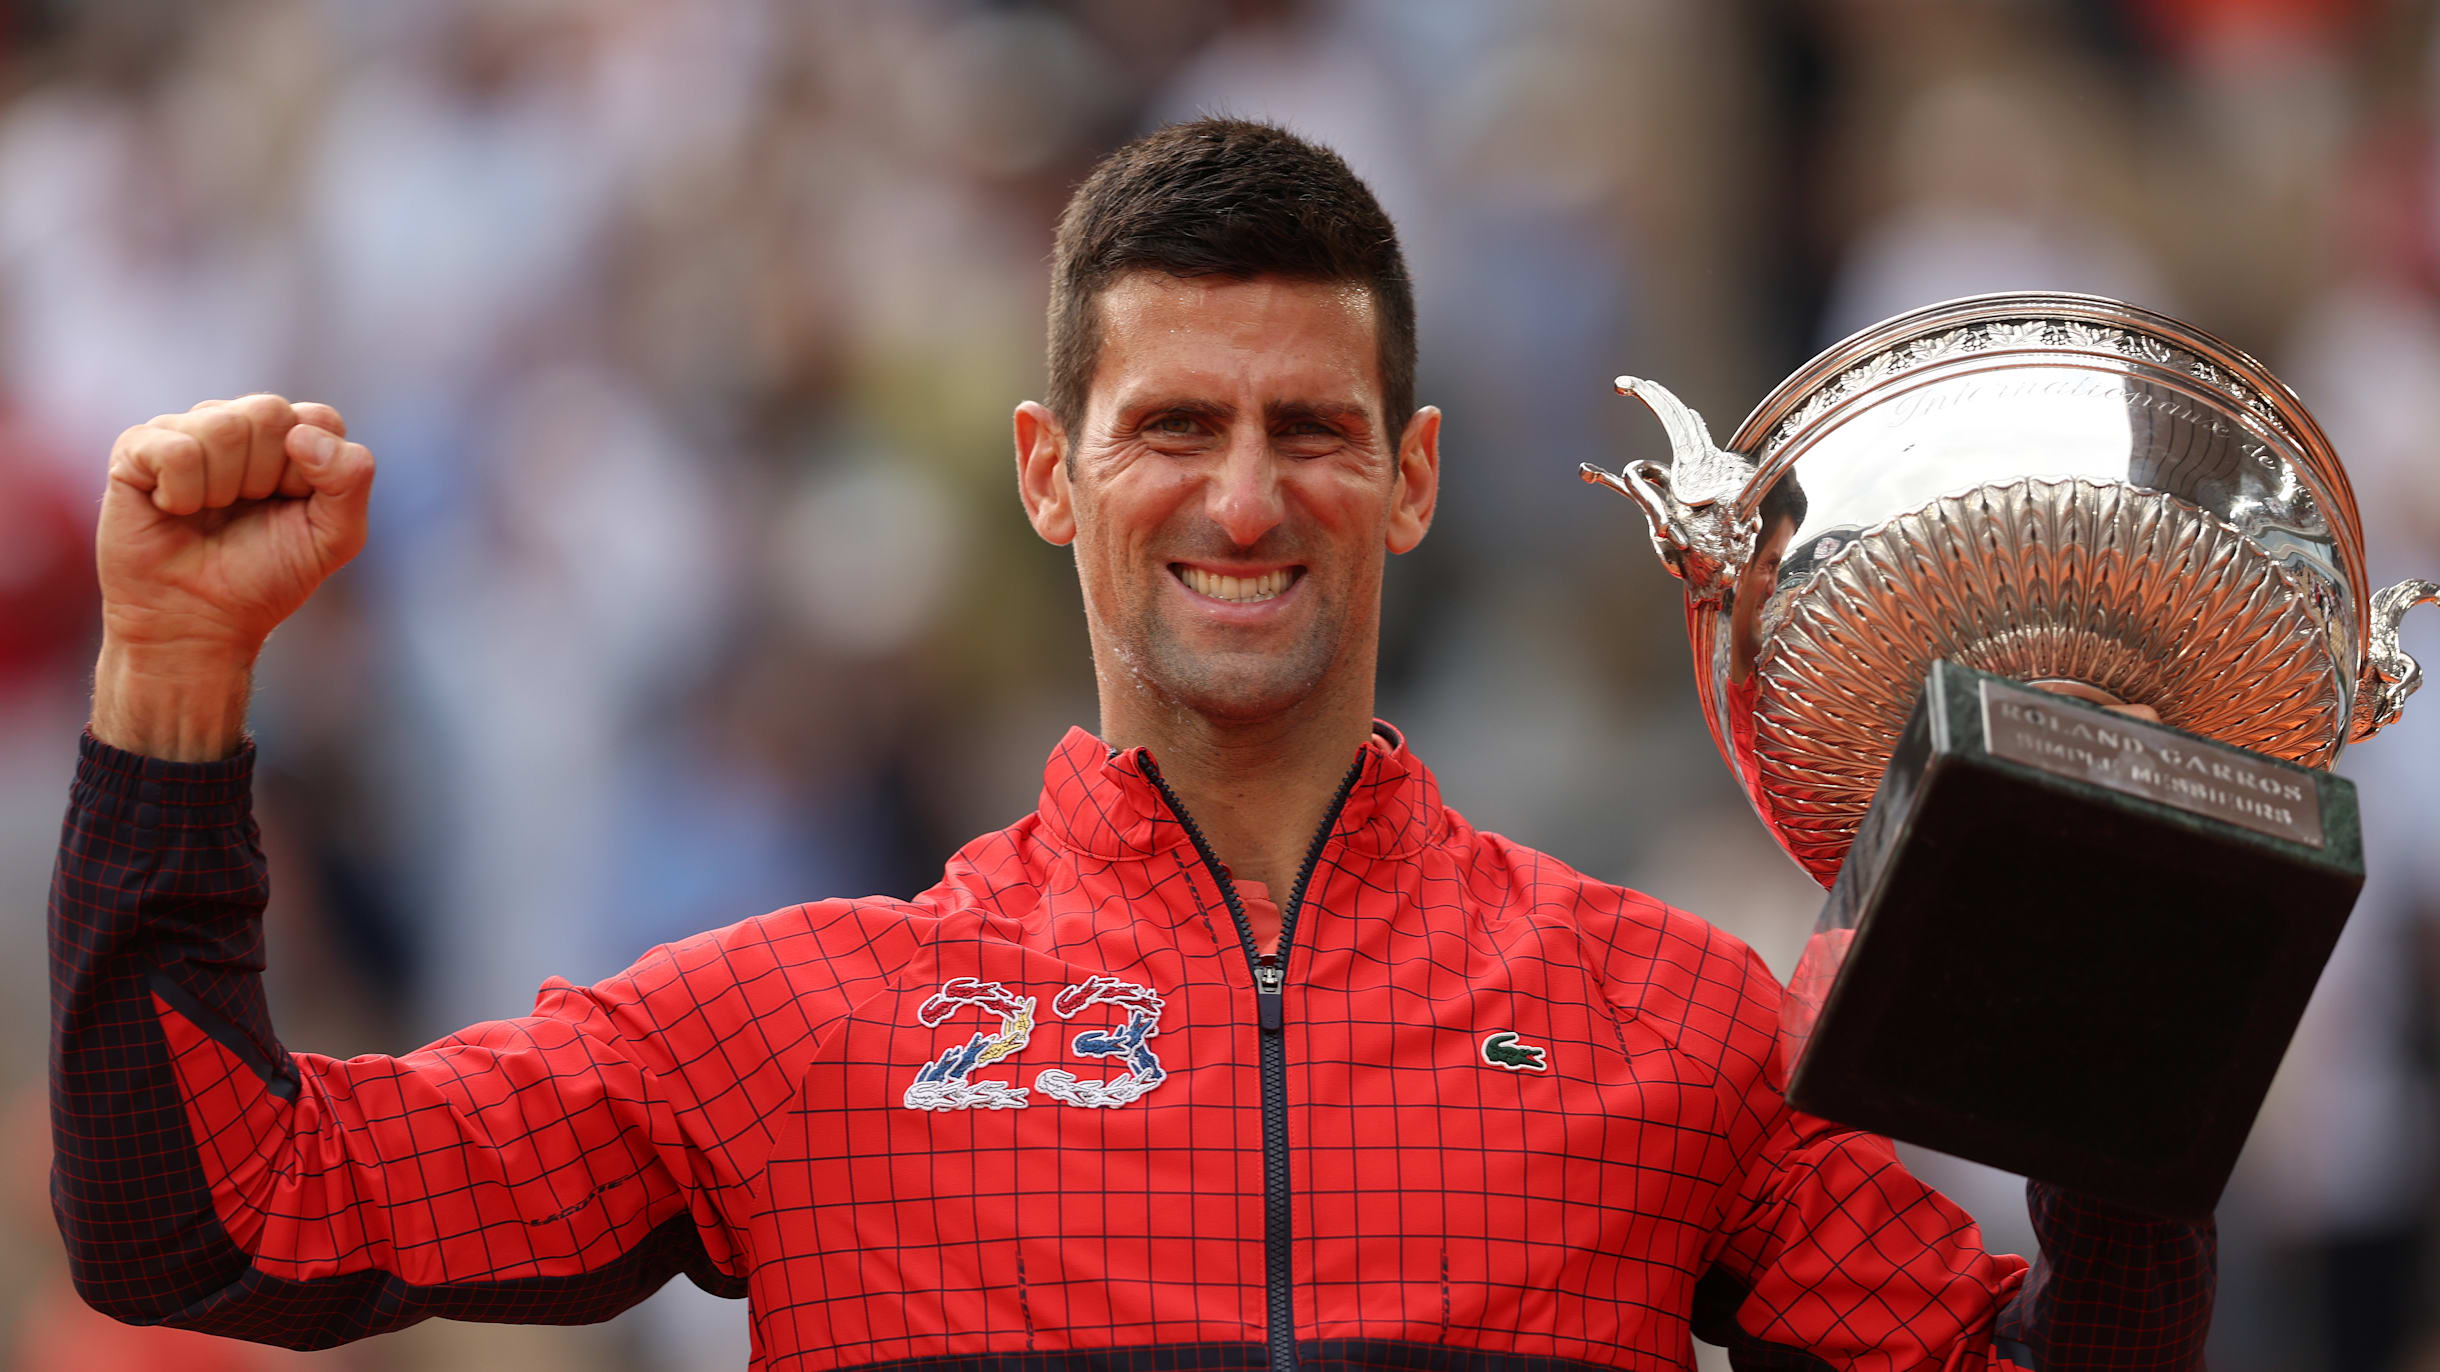 Roland-Garros 2023 Djokovic wins record 23rd Grand Slam title with French Open success